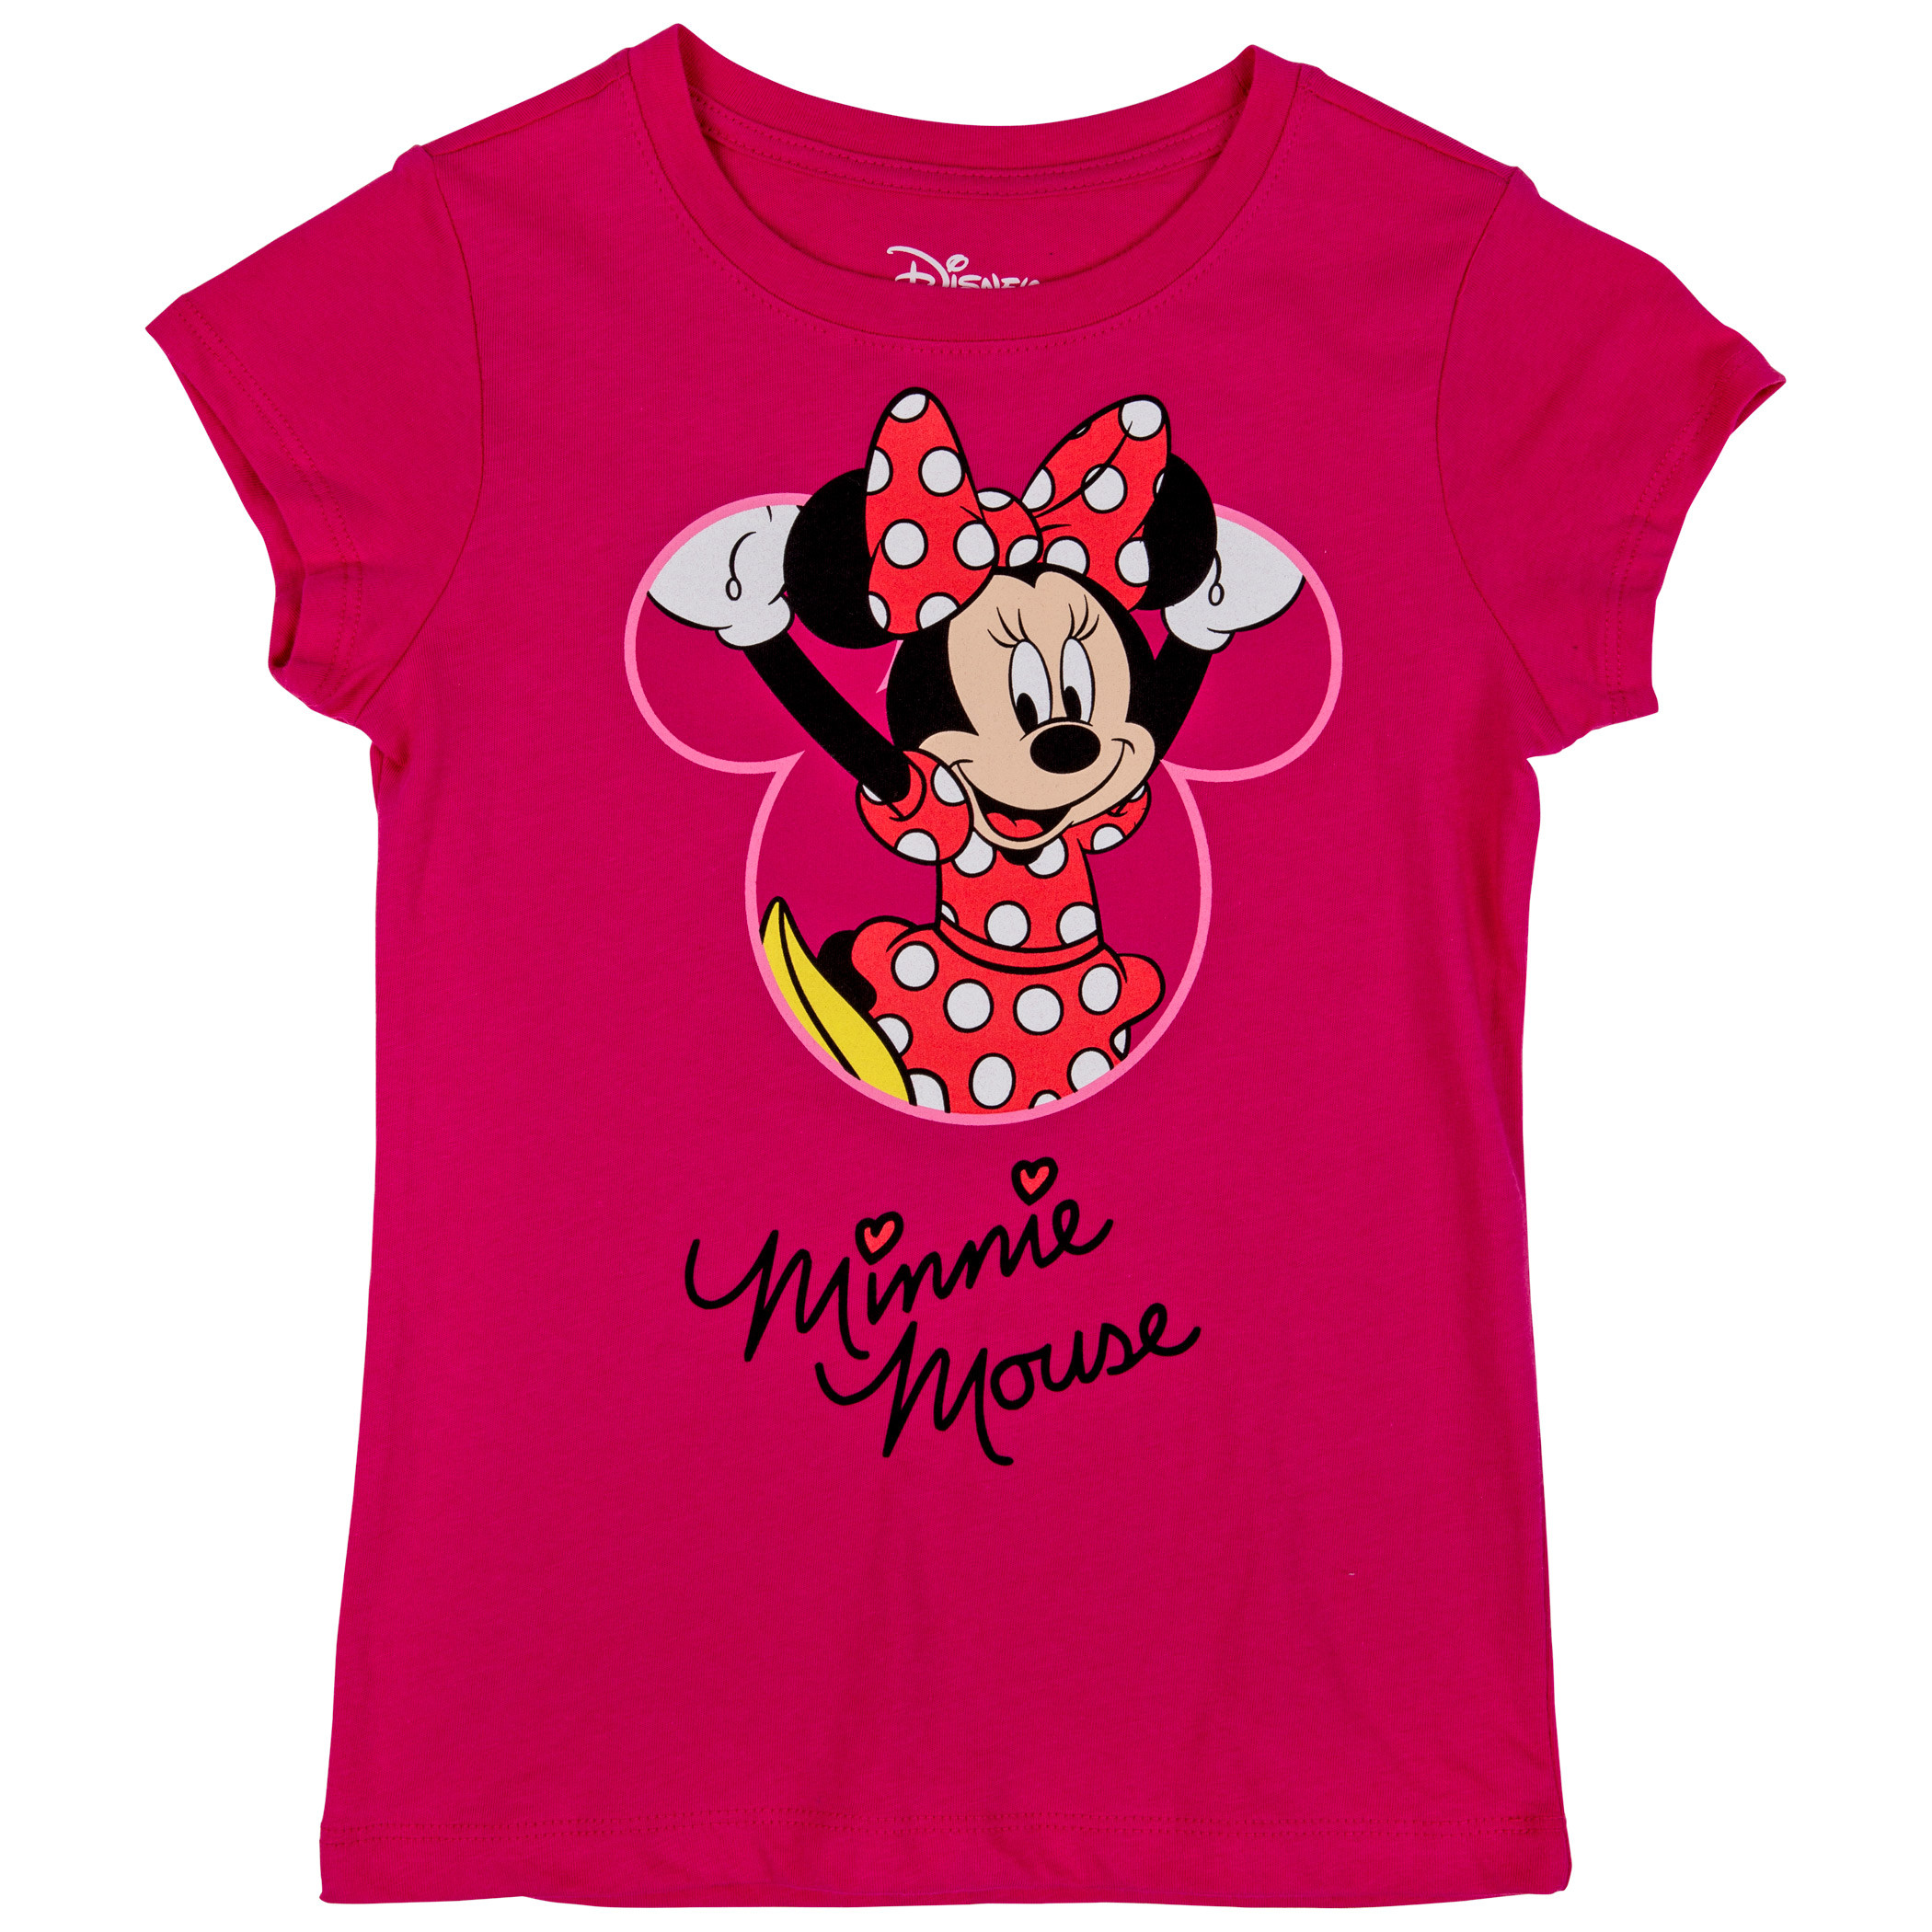 Minnie Mouse Disney Character Climbing Youth T-Shirt